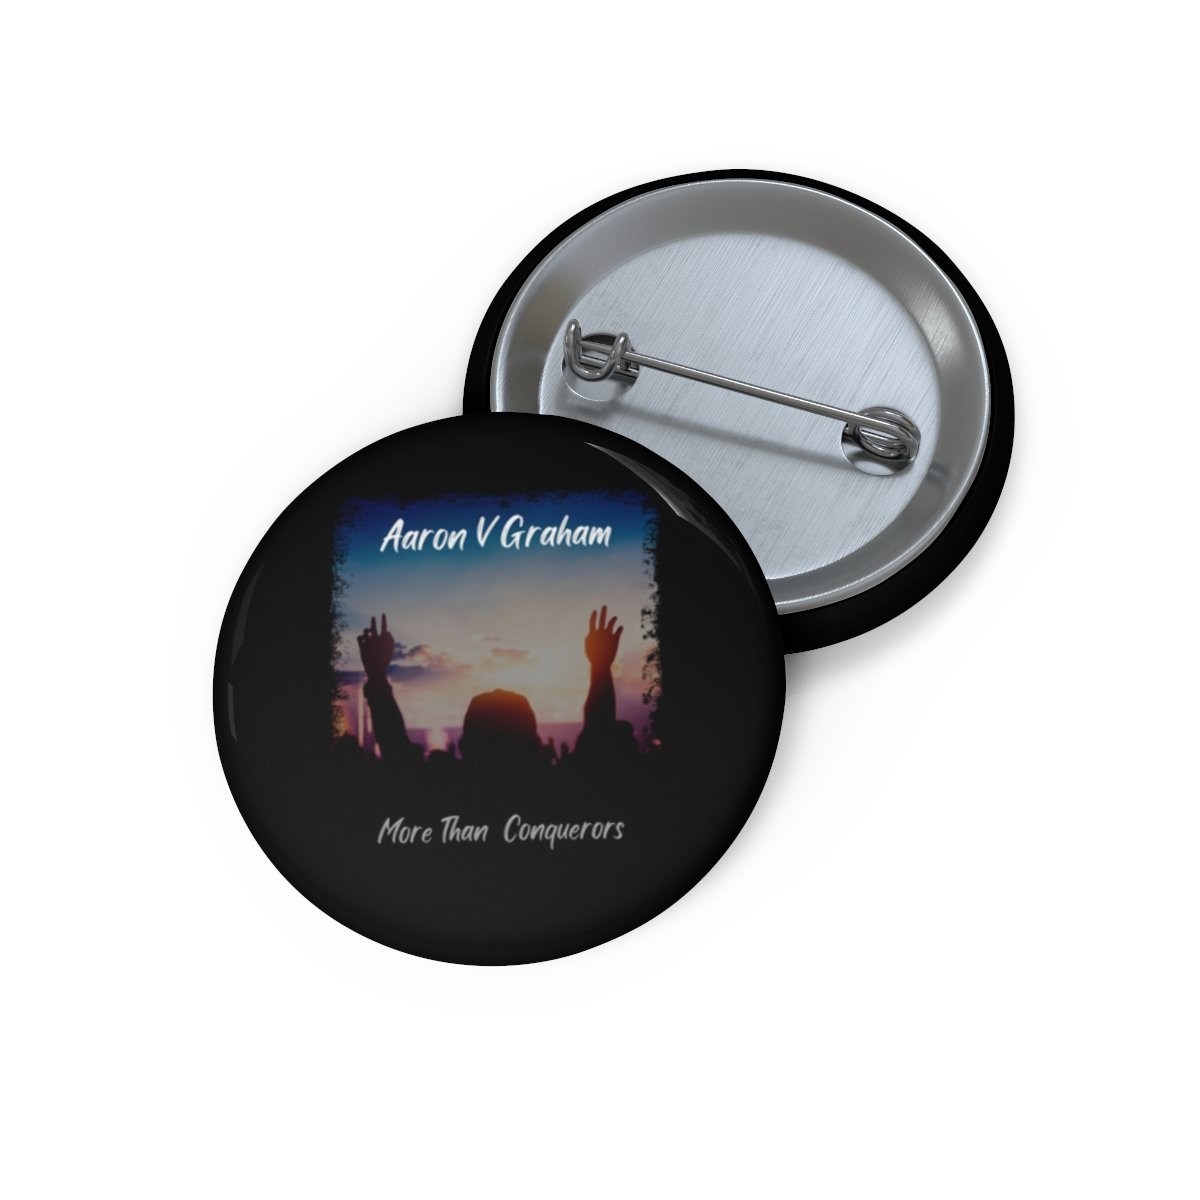 Aaron V Graham – More Than Conquerors Pin Buttons